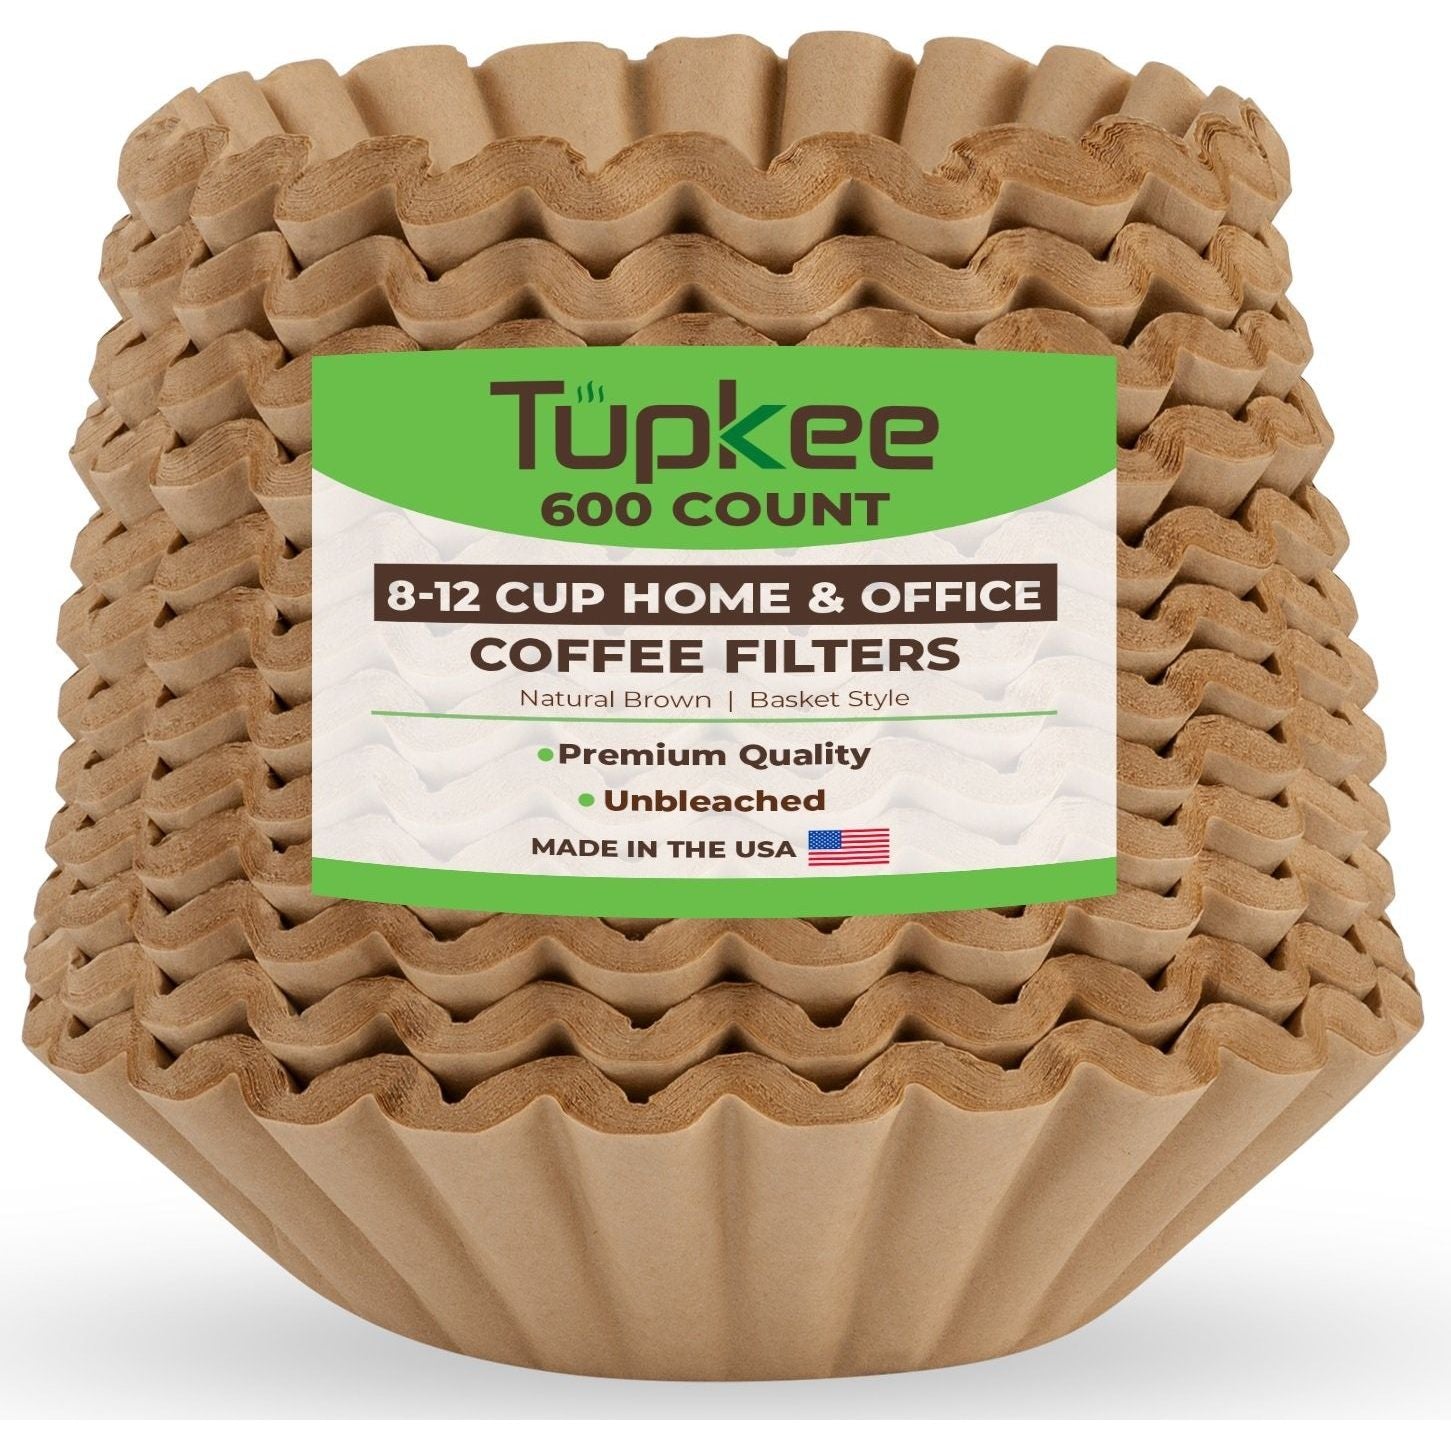 Tupkee Extra Large Coffee Filters - 1.5 to 3 Gallon (13 x 5) Coffee & Tea Filter (500 Count) - Tall Walled to Prevent Ground Overflow - Chlorine